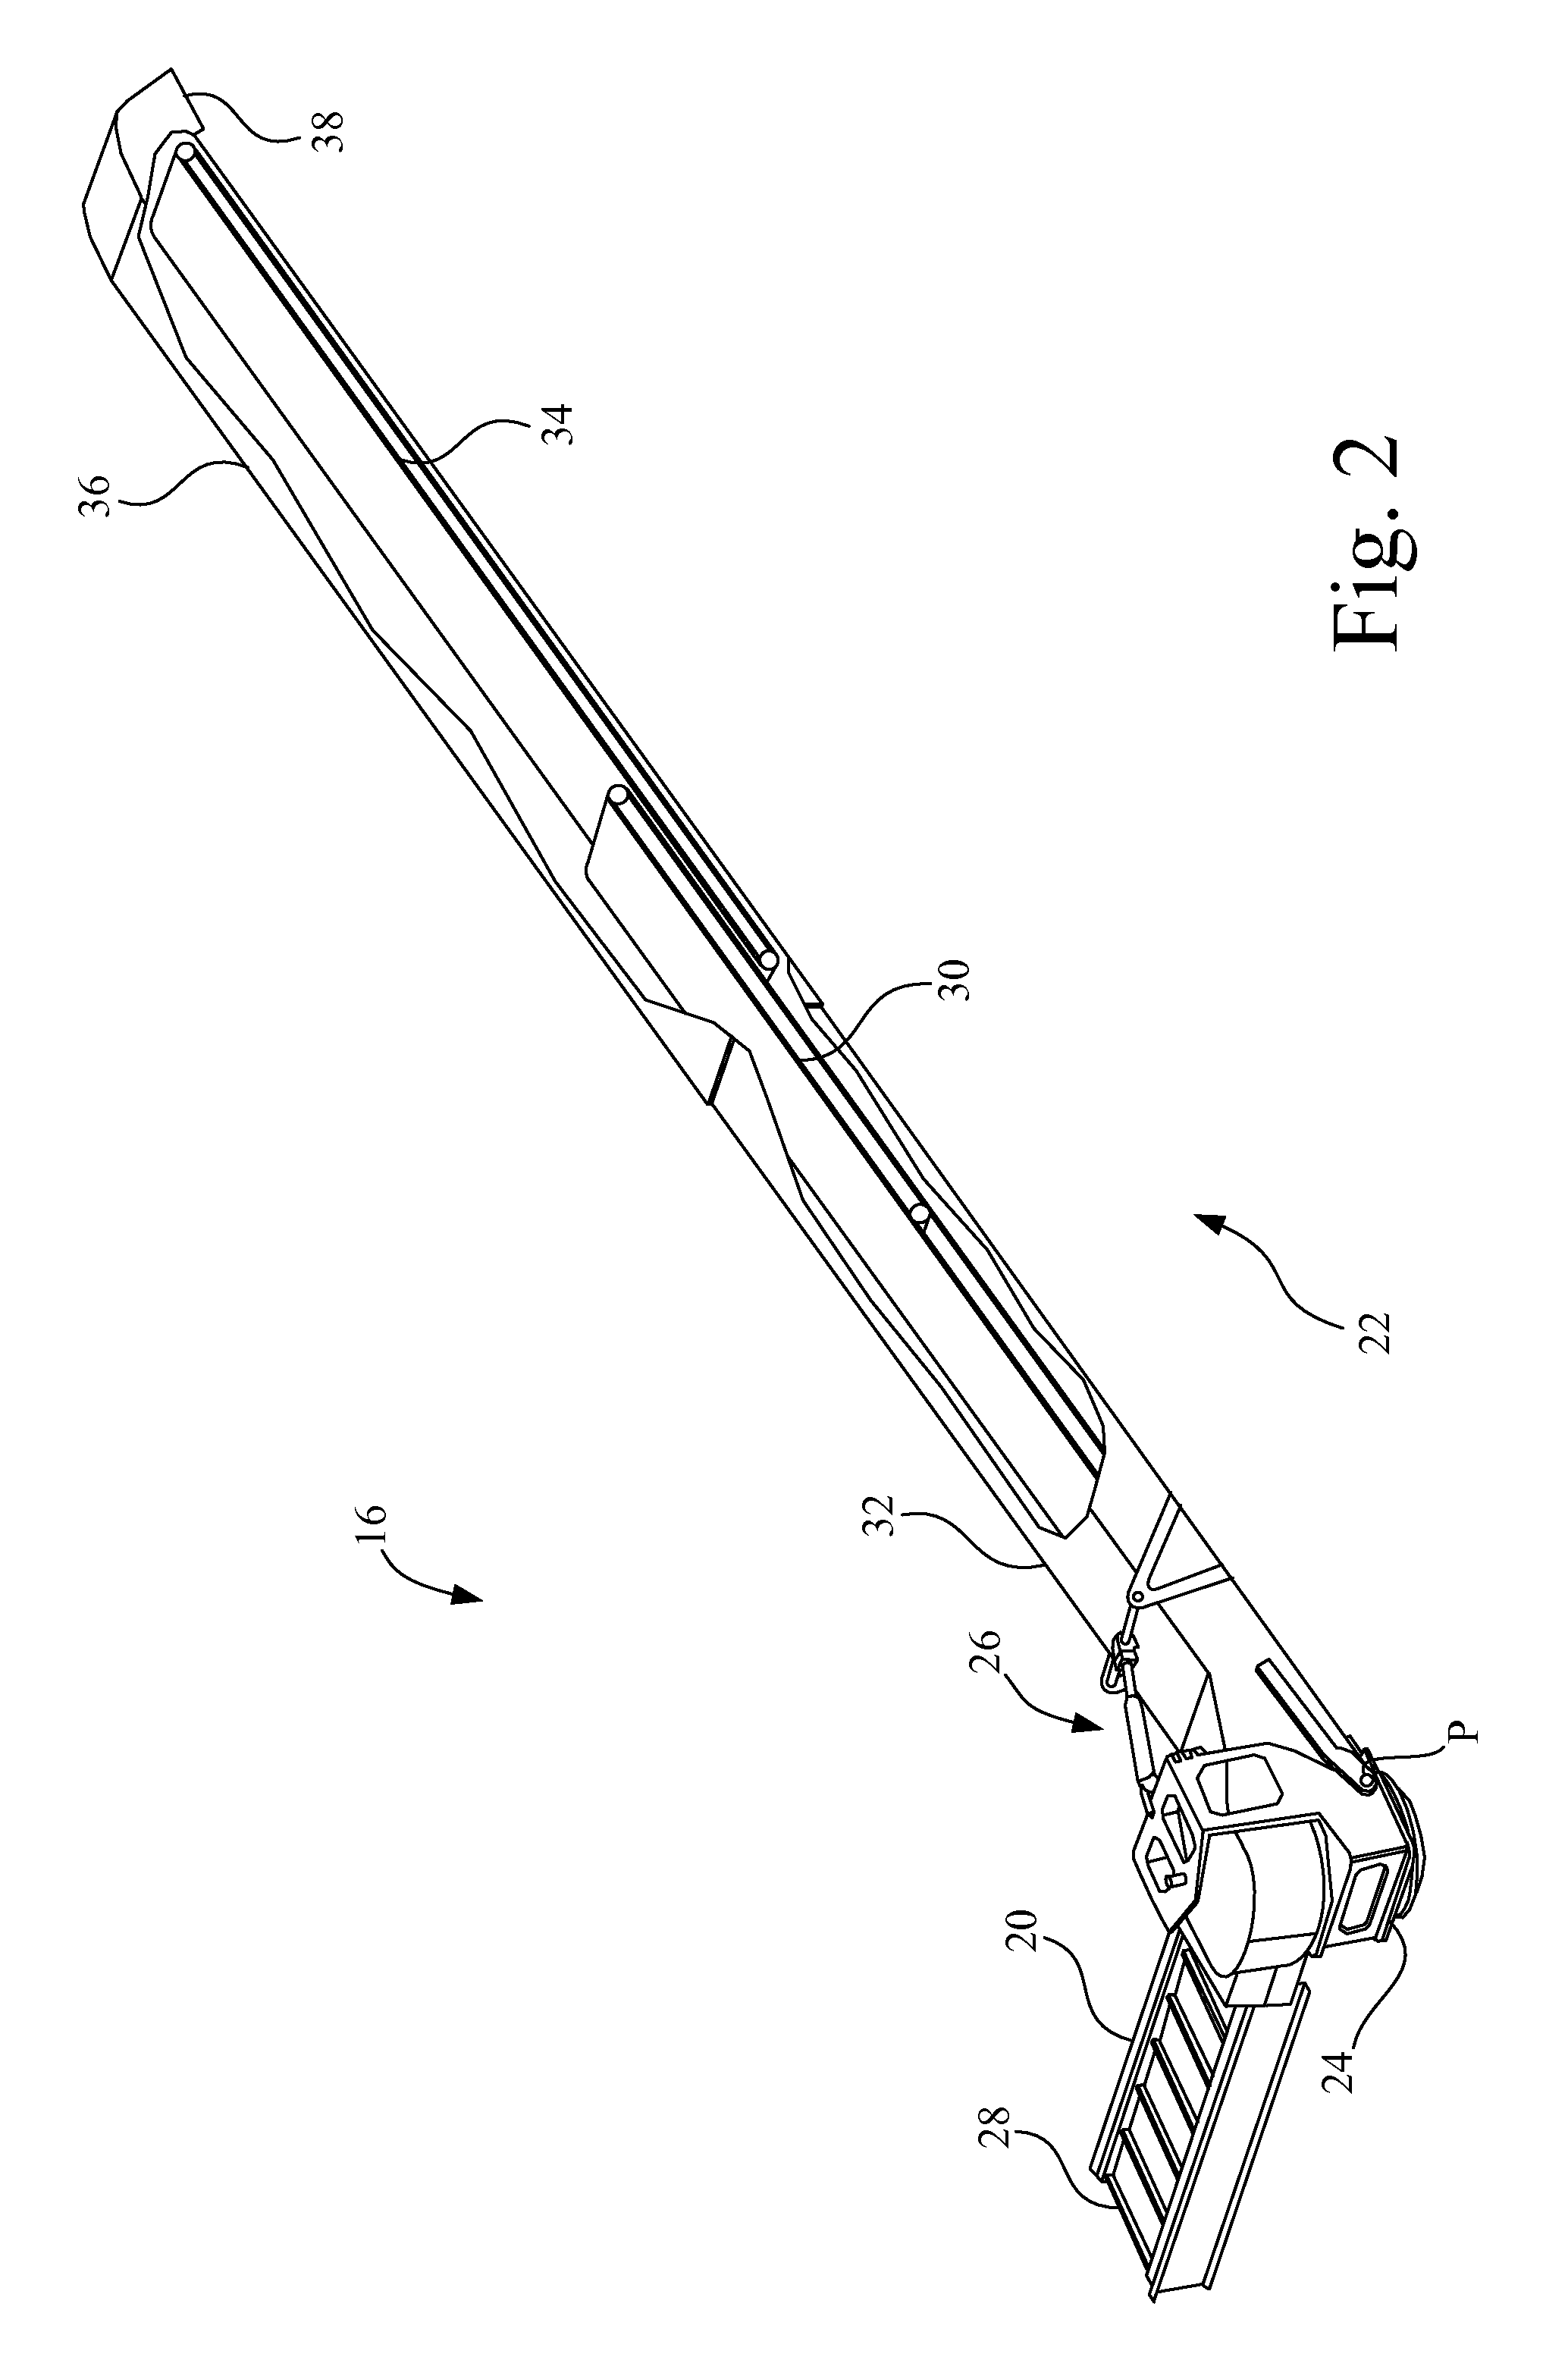 Work machine and unloading system for unloading an agricultural product from a work machine